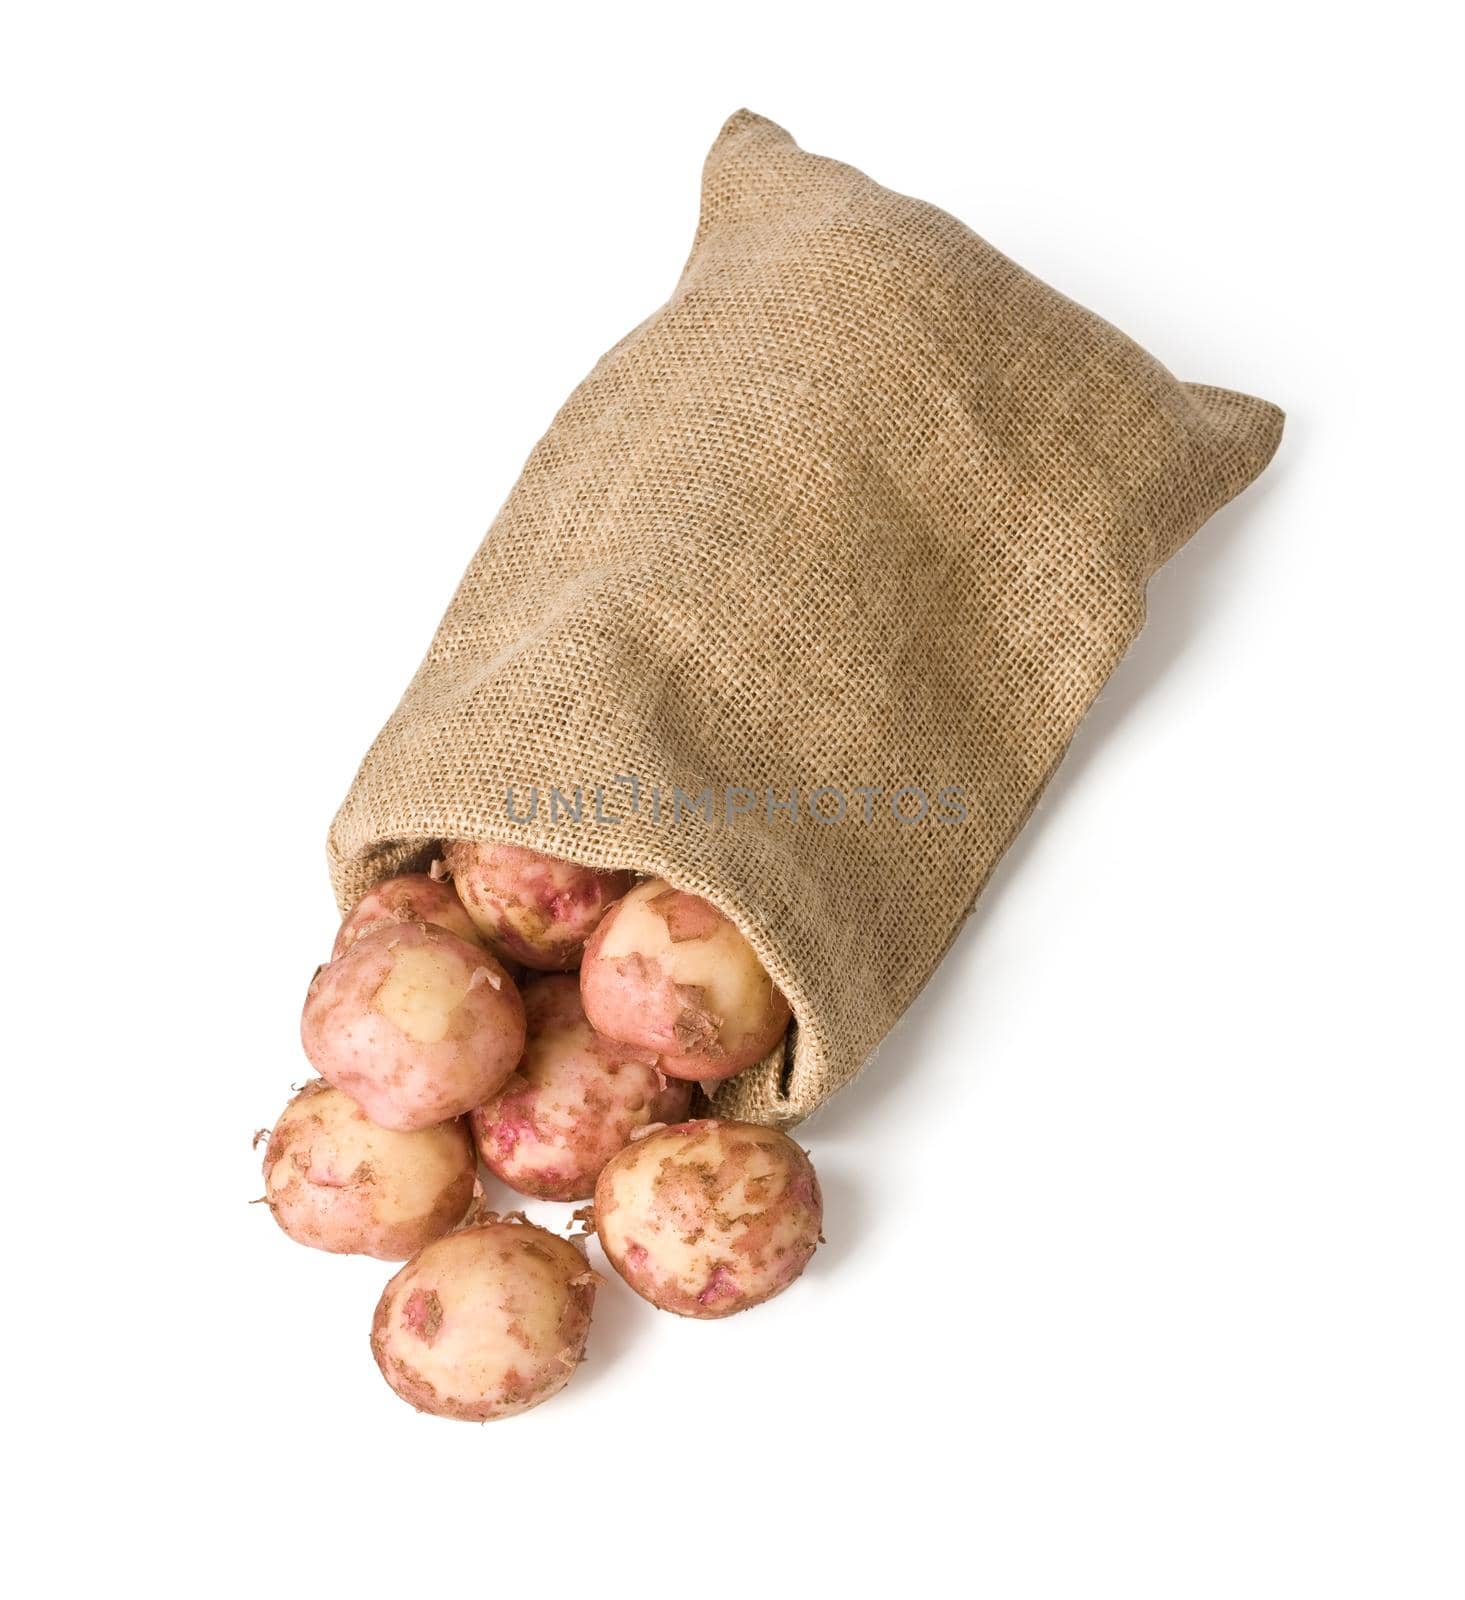 potatoes in burlap sack on white background with clipping path